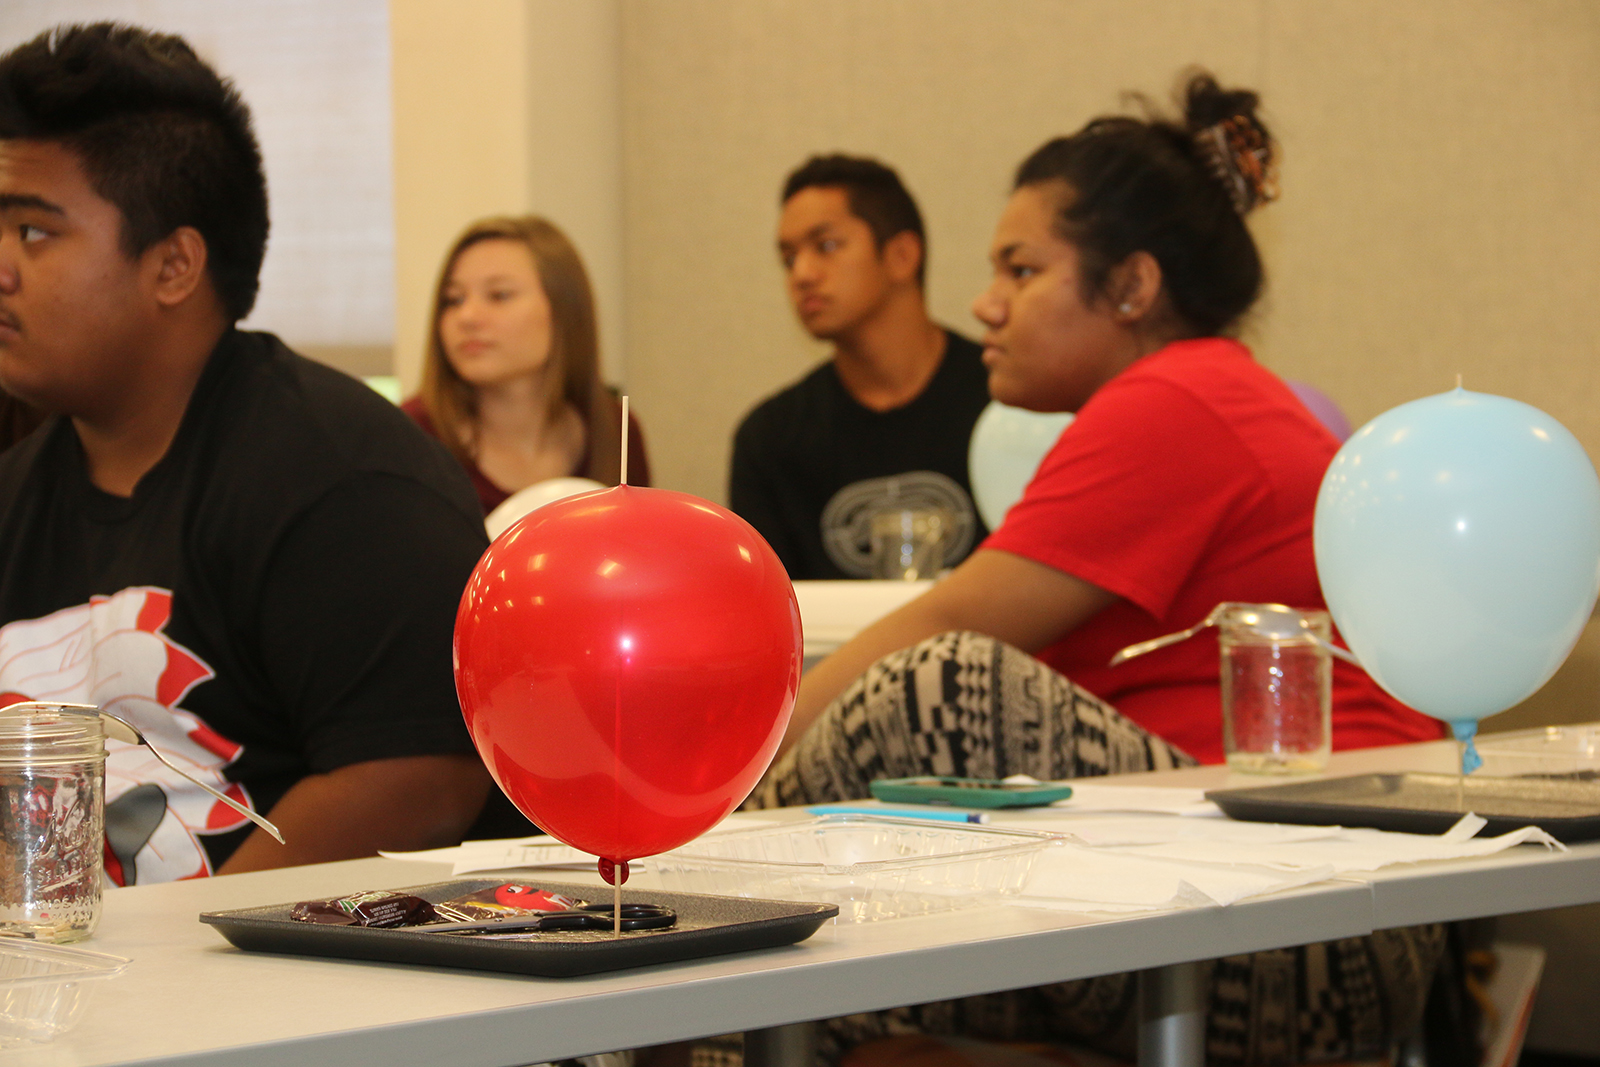 Close-up of the balloon experiment by Onipaʻa students